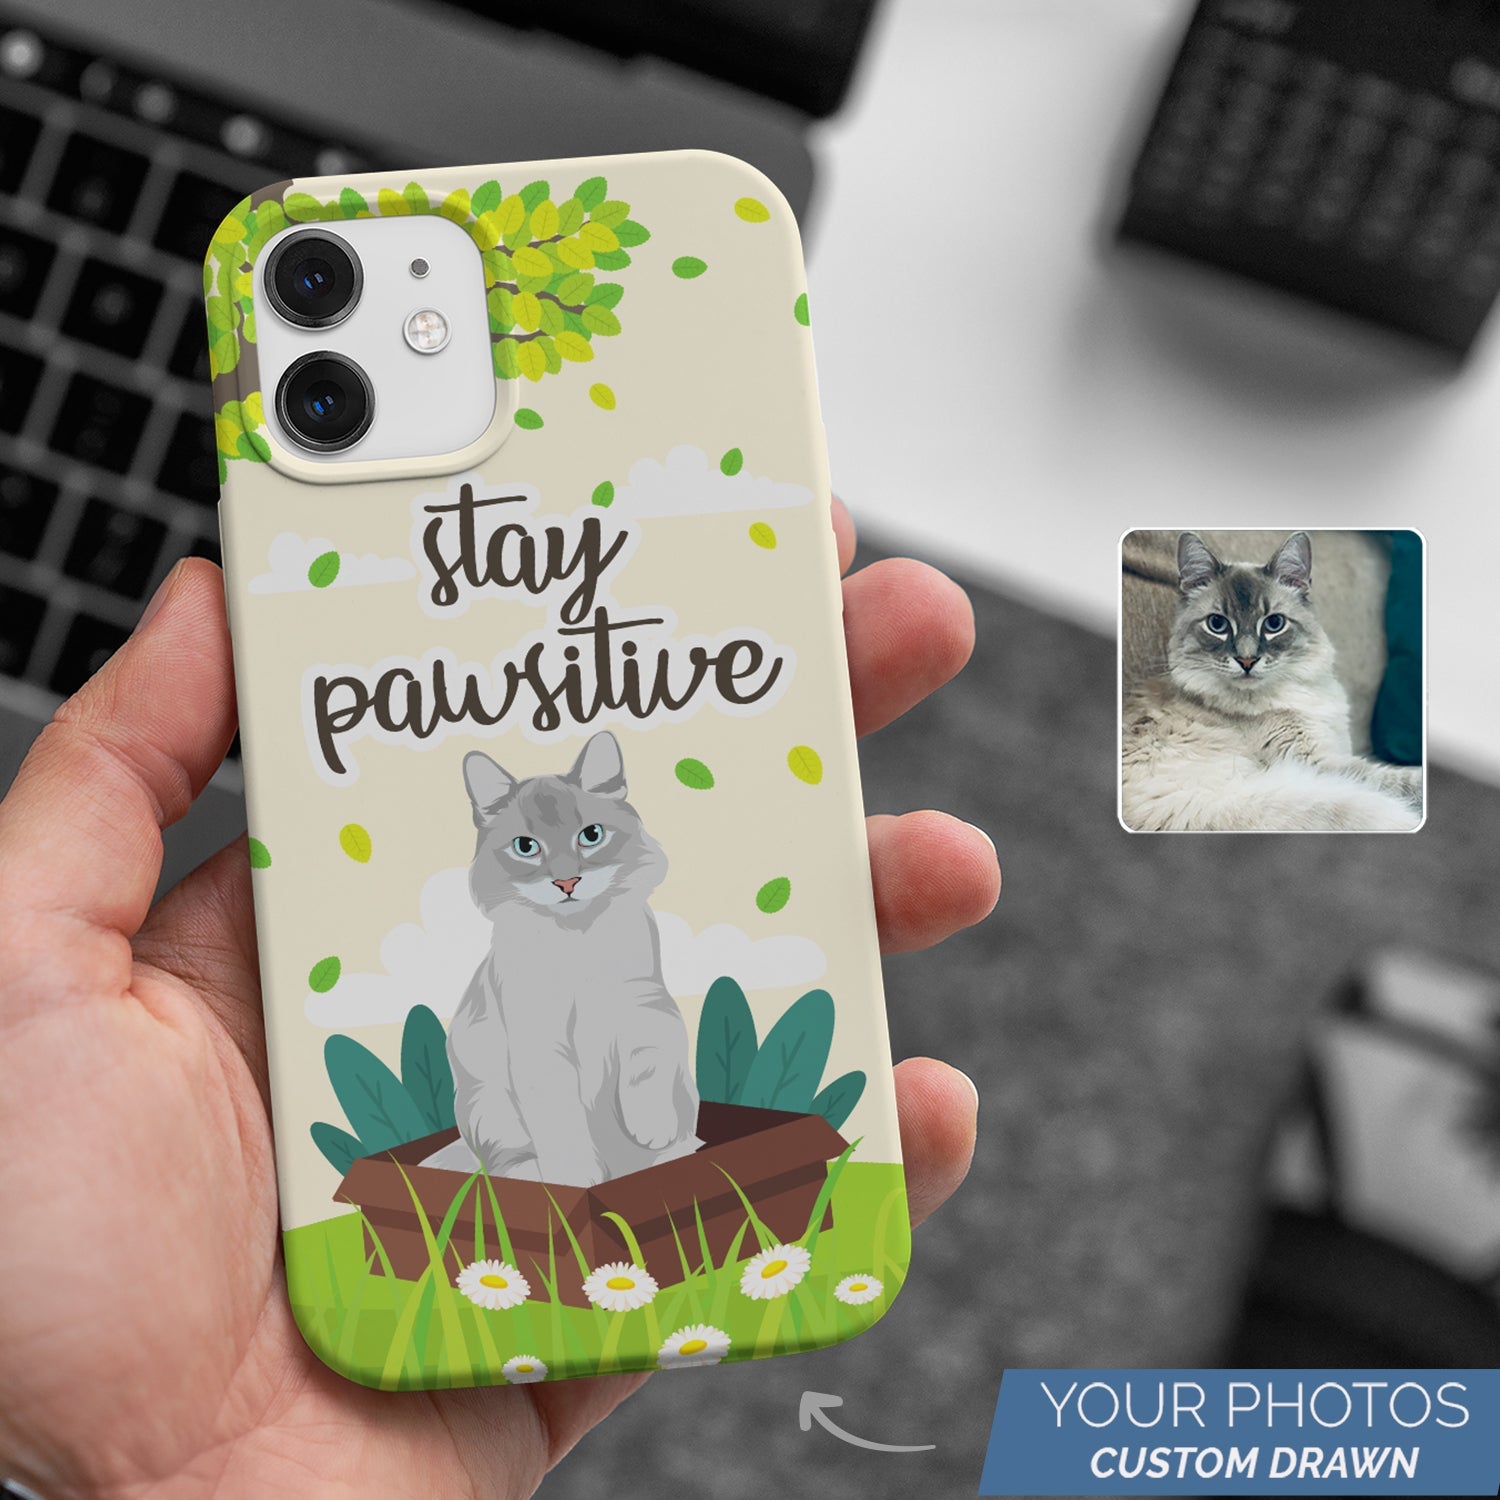 Stay Pawsitive Phone Case Personalized CTNP0016